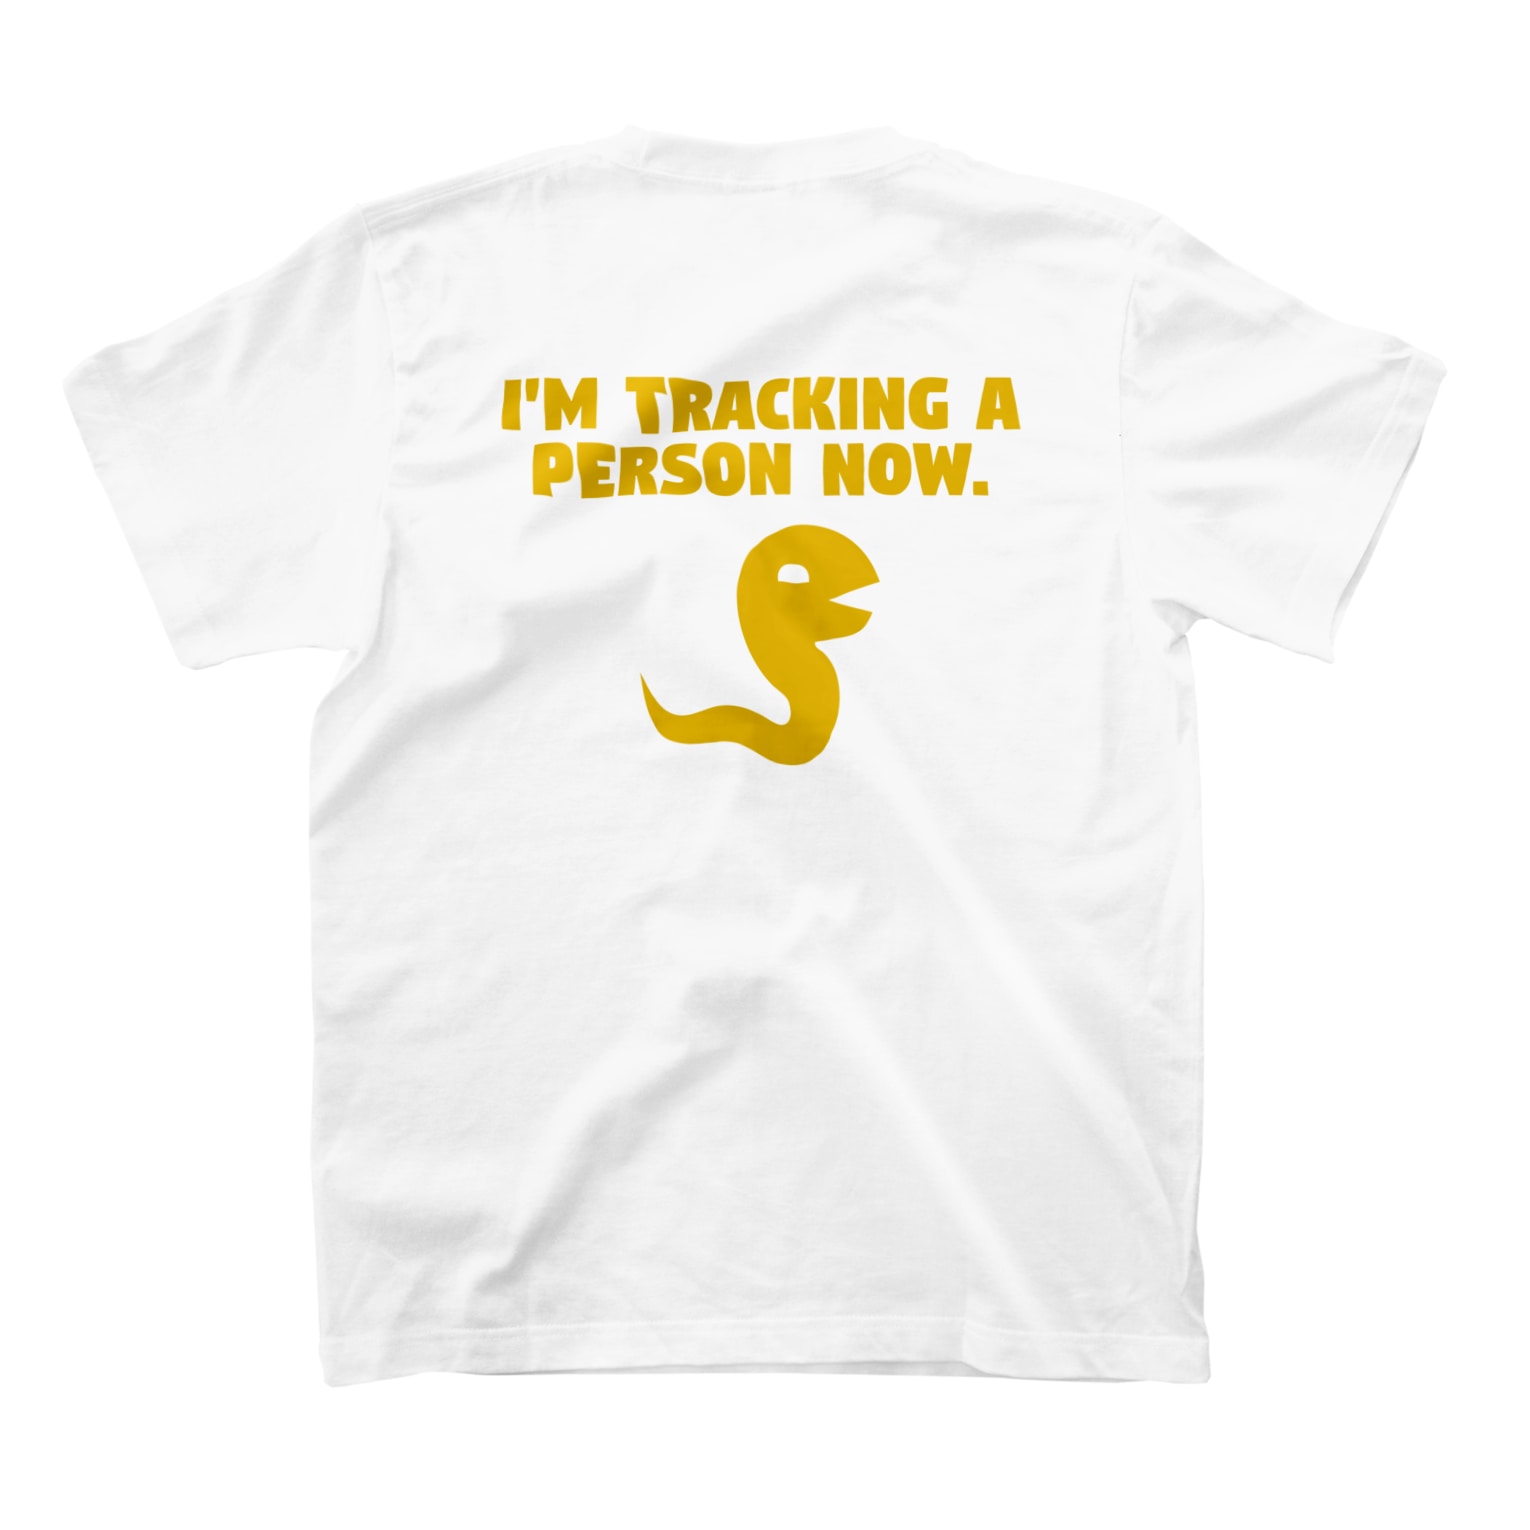 I'm tracking a person now TEE WHITE